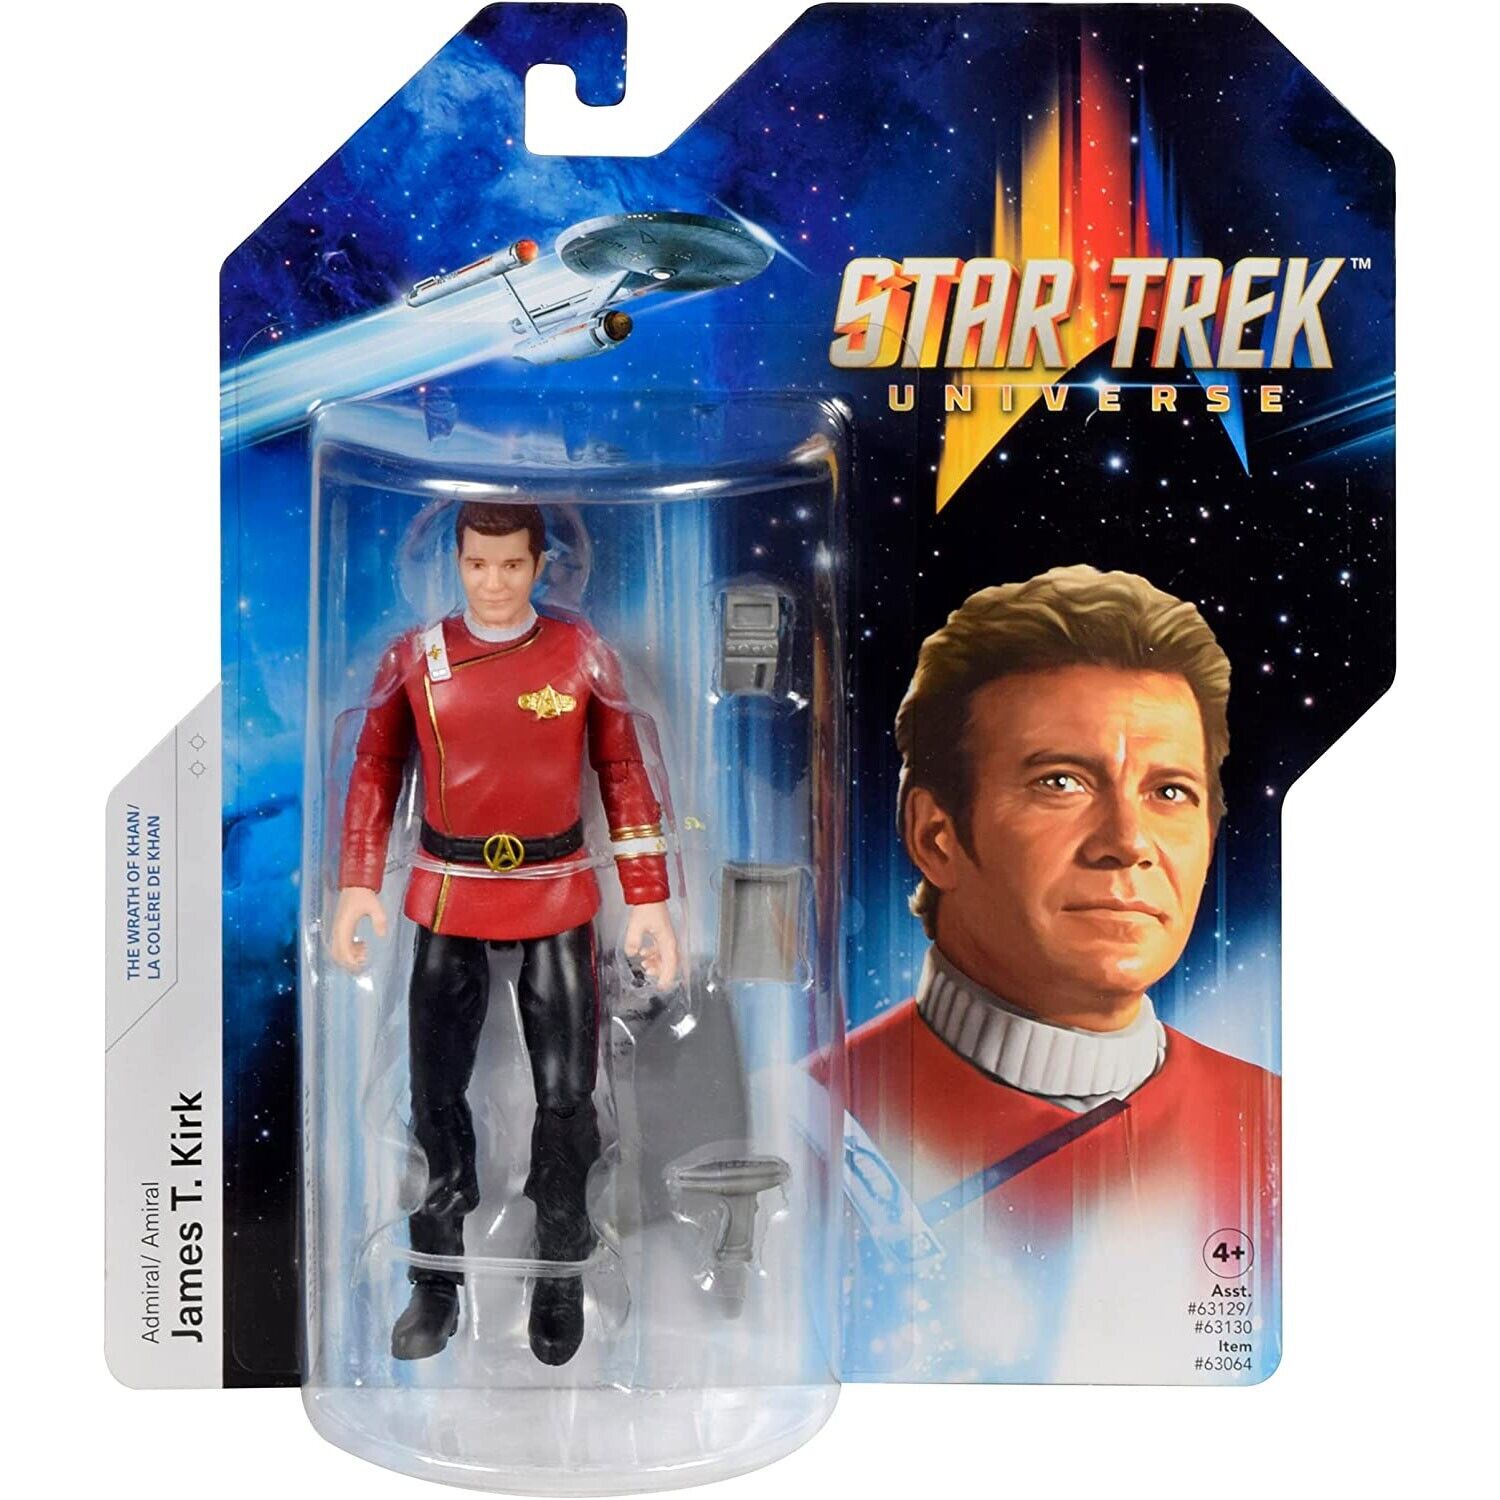 Star Trek Admiral Kirk Figure 5-Inch - The Wrath of Khan Collectible